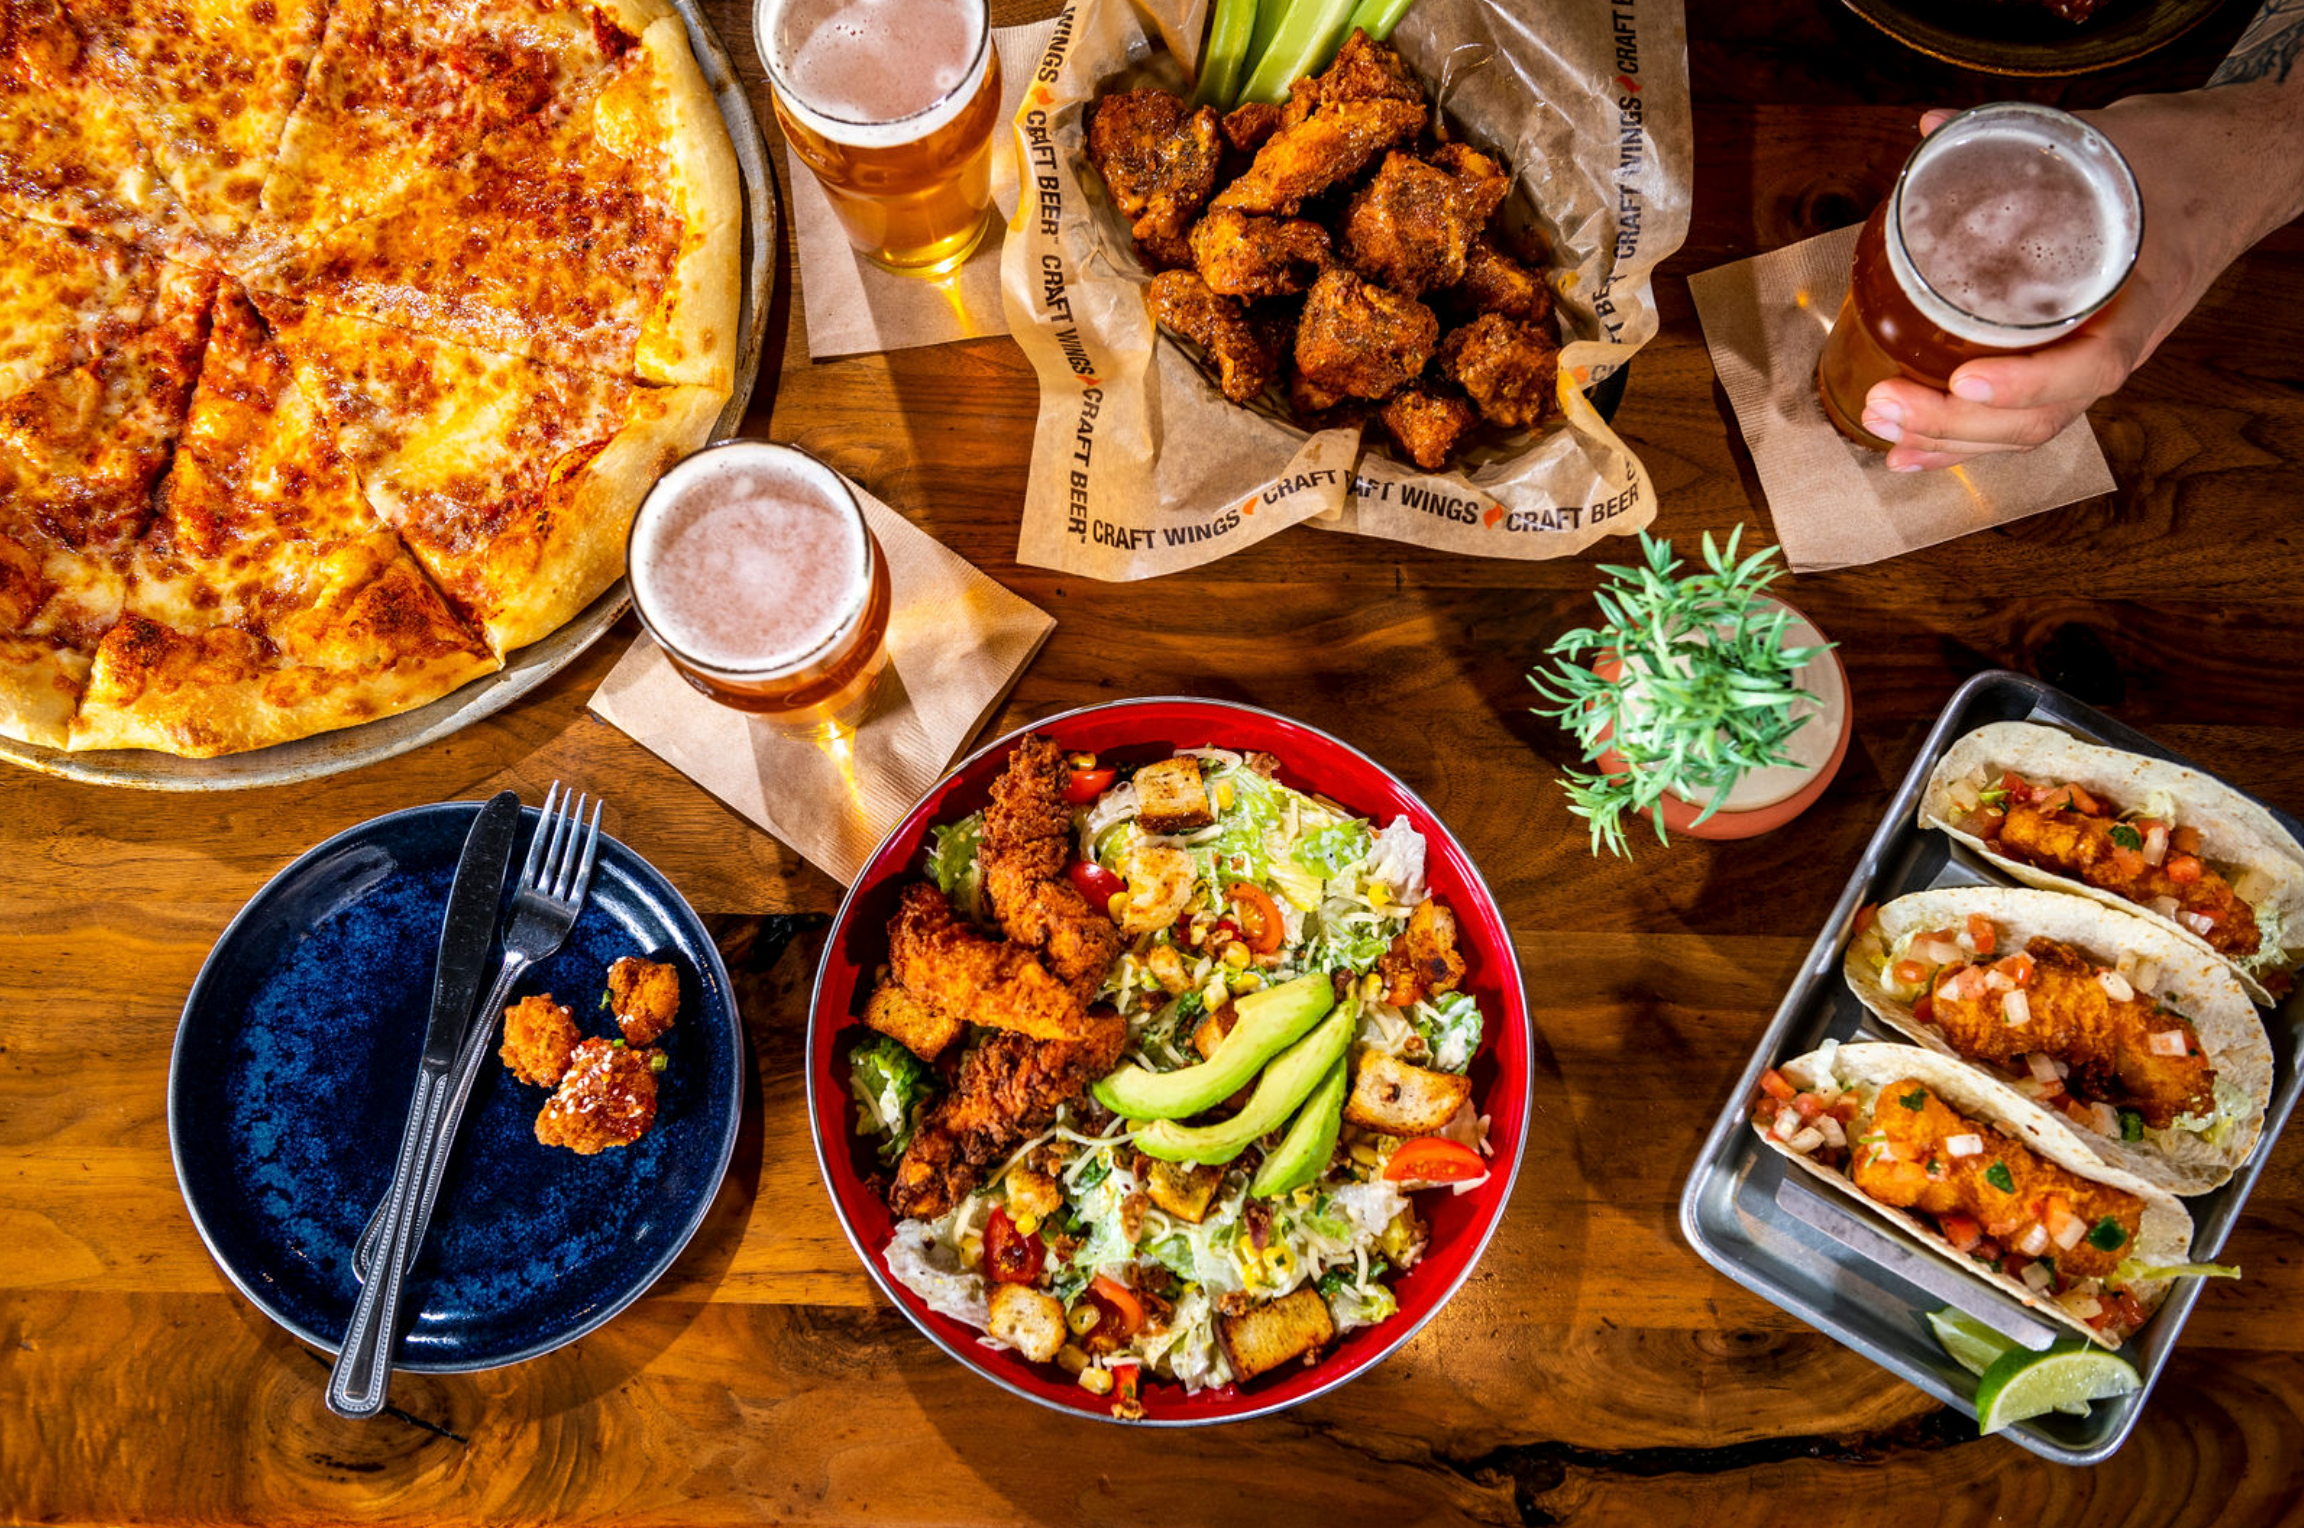 The Church St. Salad, a cheese pizza, dry rub wings, and fish tacos, served with cold beers